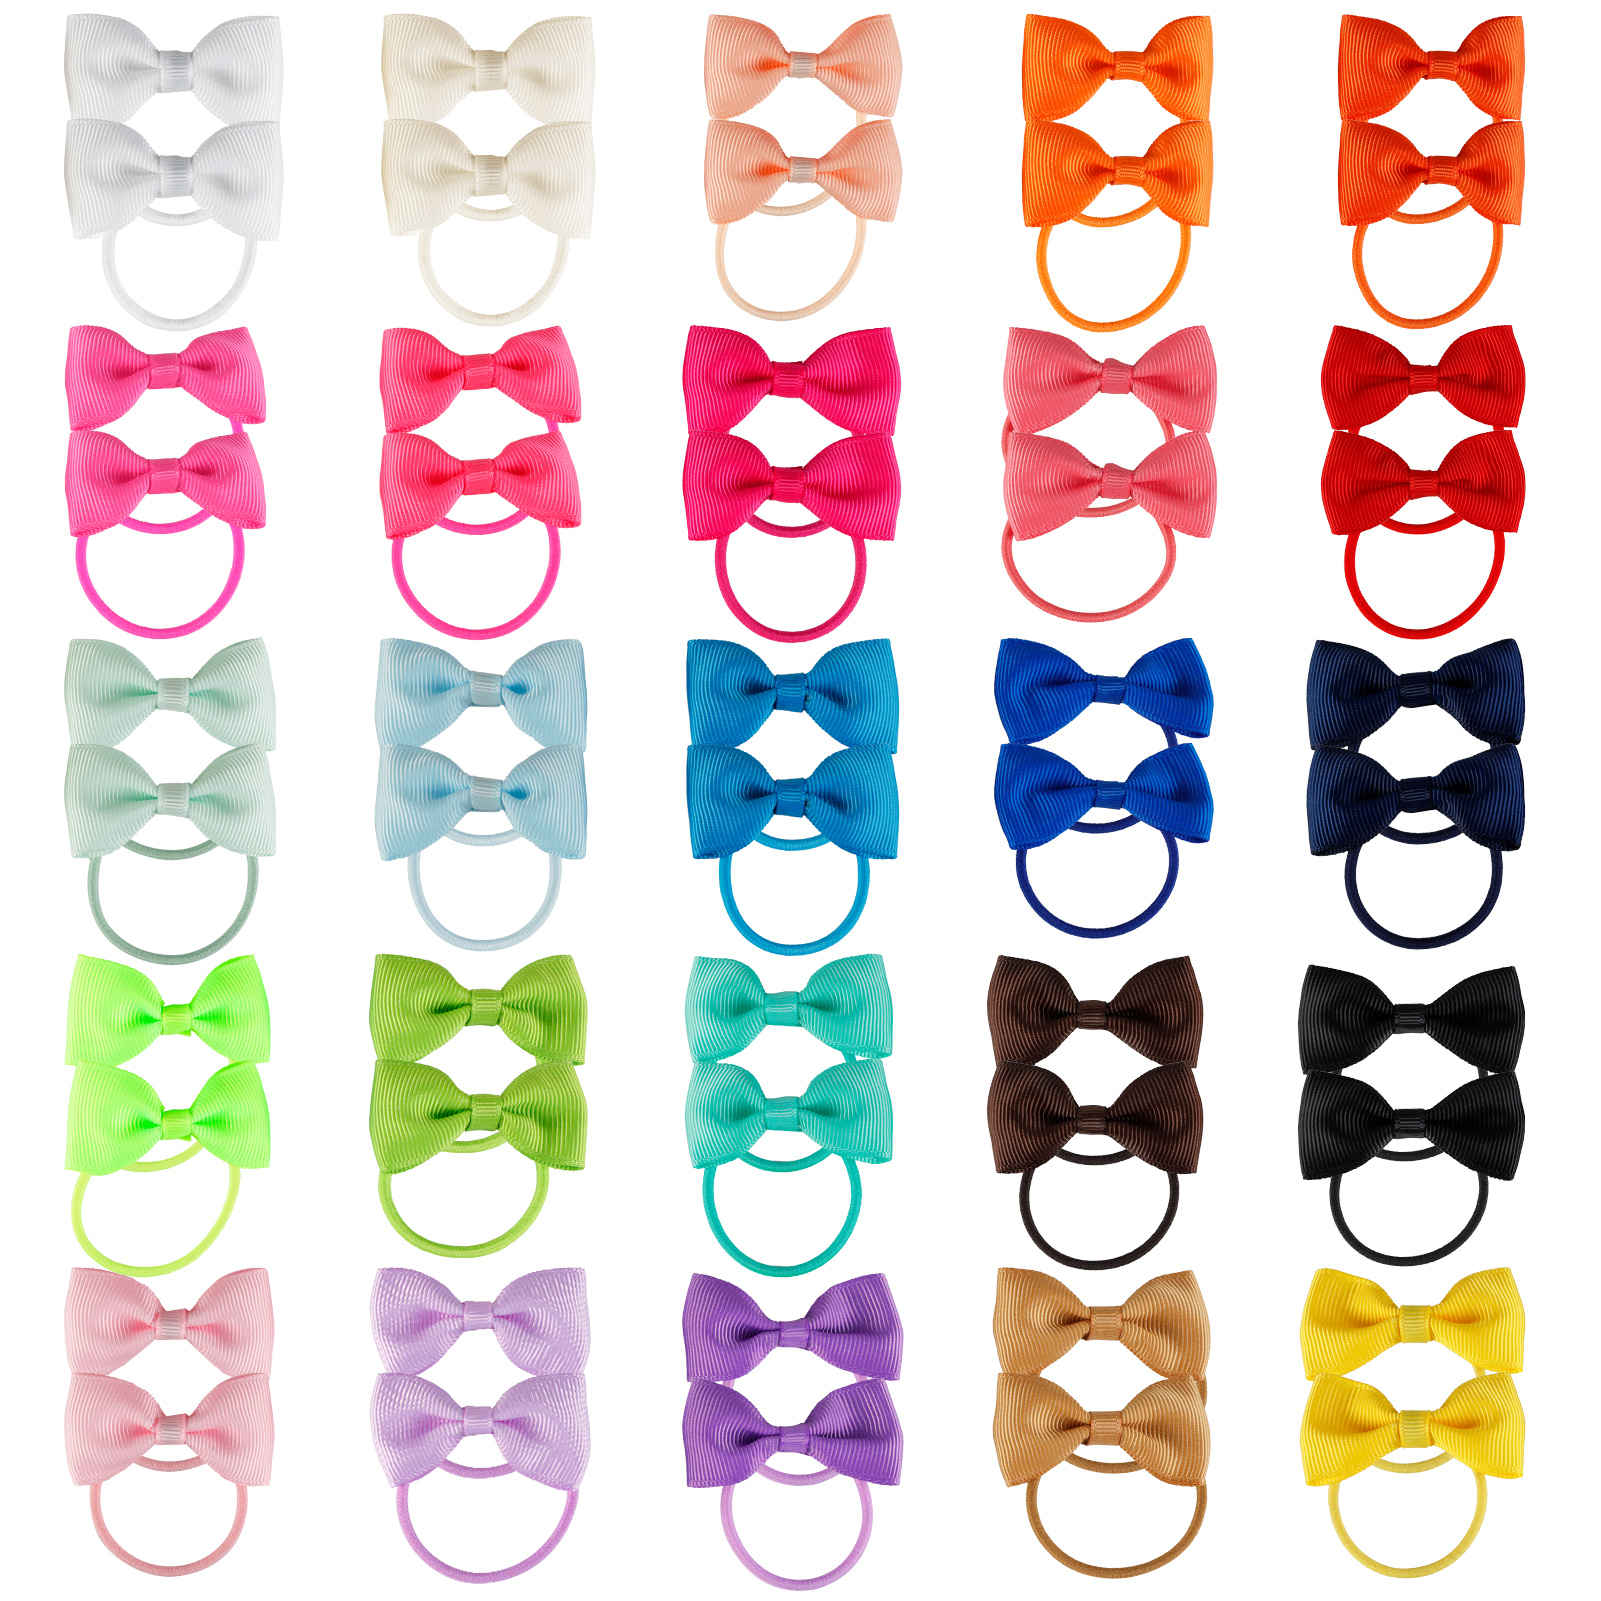 Peaoy 50PCS Baby Hair Ties with Bows for Infants Toddler Girls Grosgrain Ribbon Rubber Bands Elastic Ponytail Holders 2 Inch - image 4 of 9